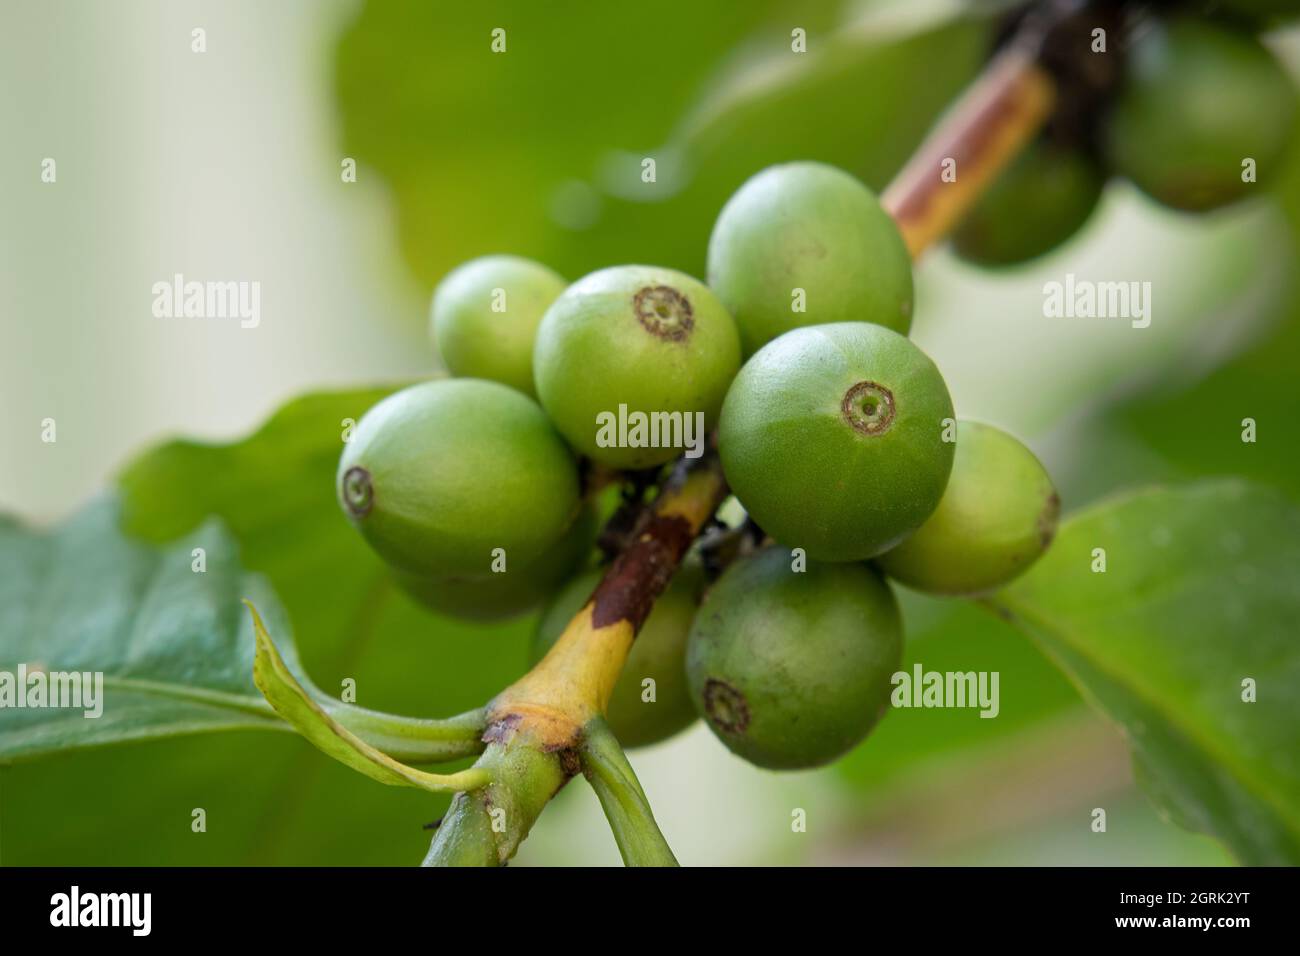 Fresh green unripe coffee beans growing on a plant outdoor close up Stock Photo